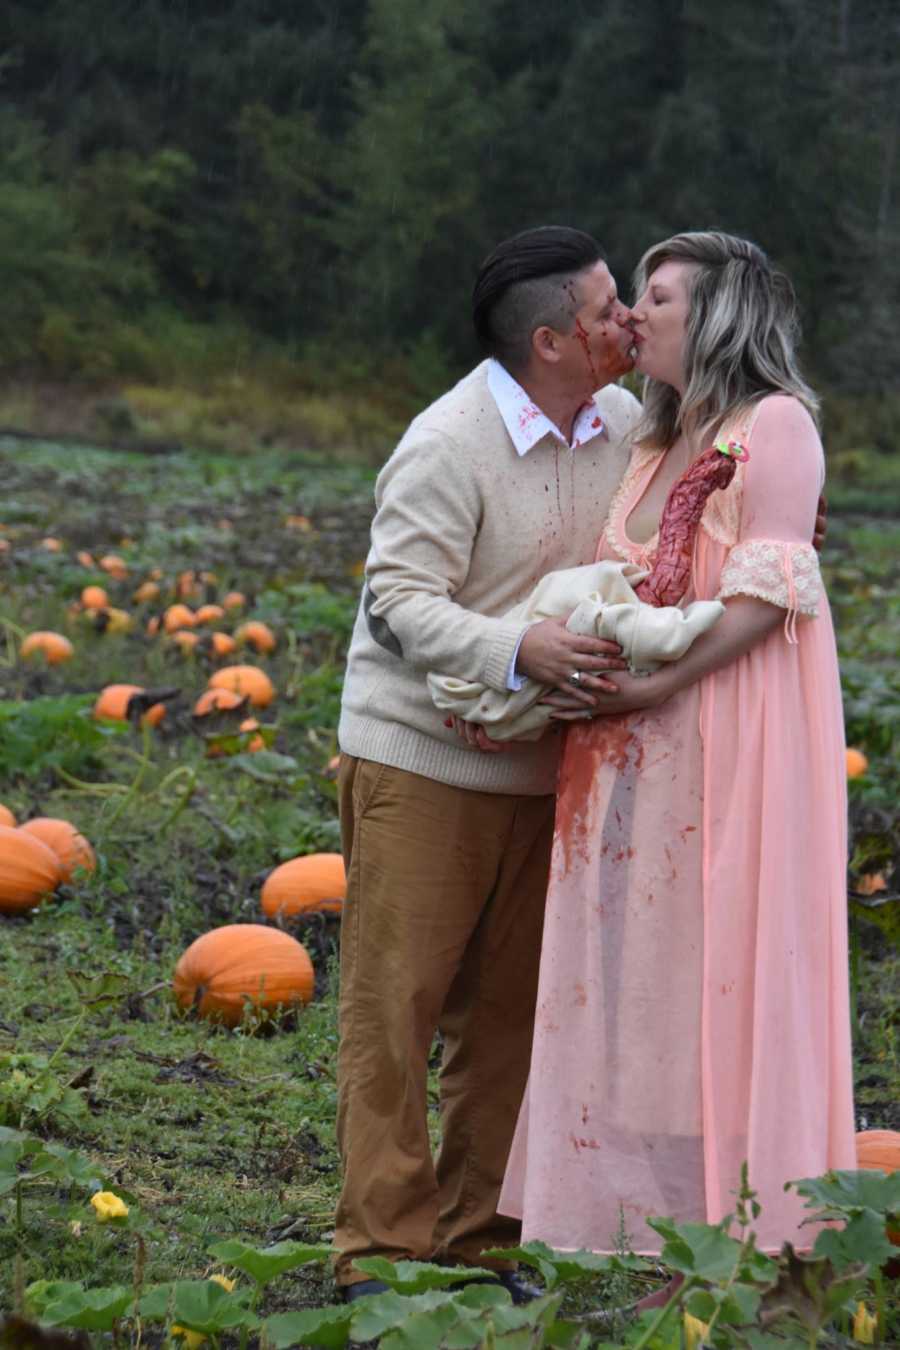 Husband and wife kiss as they hold bloody creature that came out of wife's stomach in pumpkin patch